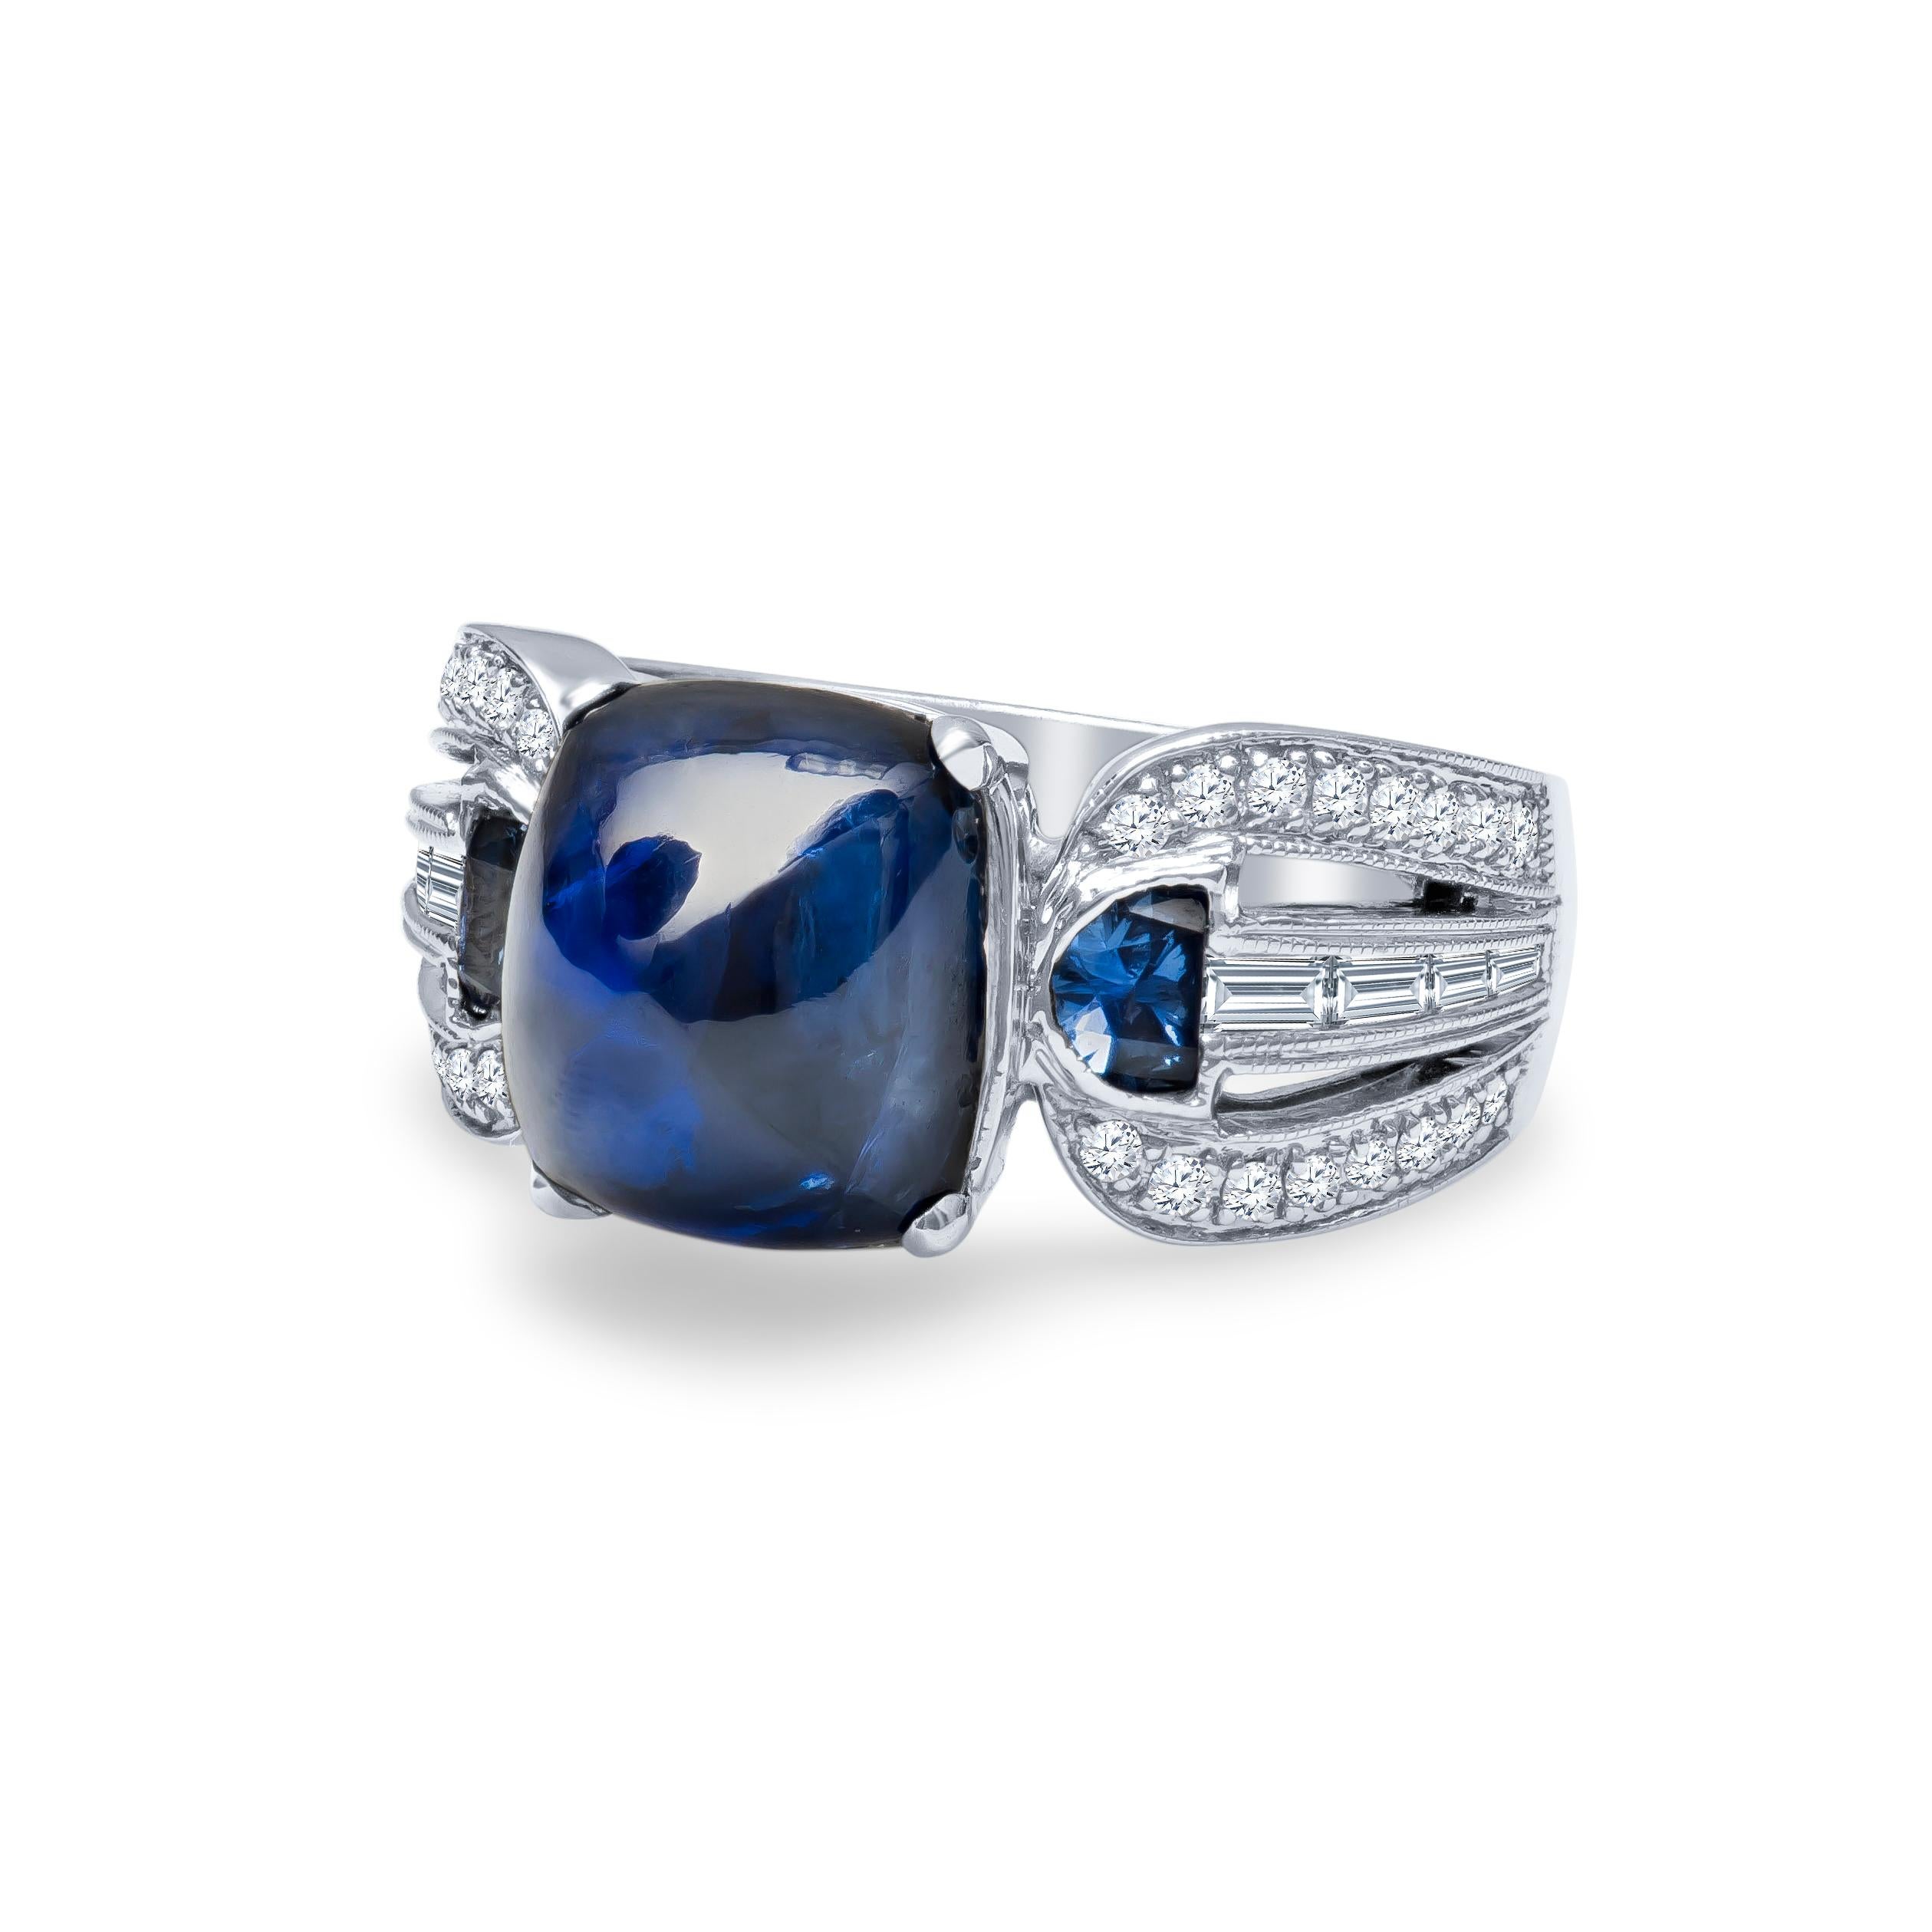 Stunning 9.06 carat sugarloaf cabochon natural blue sapphire with 0.42 carats total of half moon blue sapphires and 0.57 carats total in baguette and round brilliant diamonds. Set in 18K white gold, size 6.5. This ring may be resized larger or